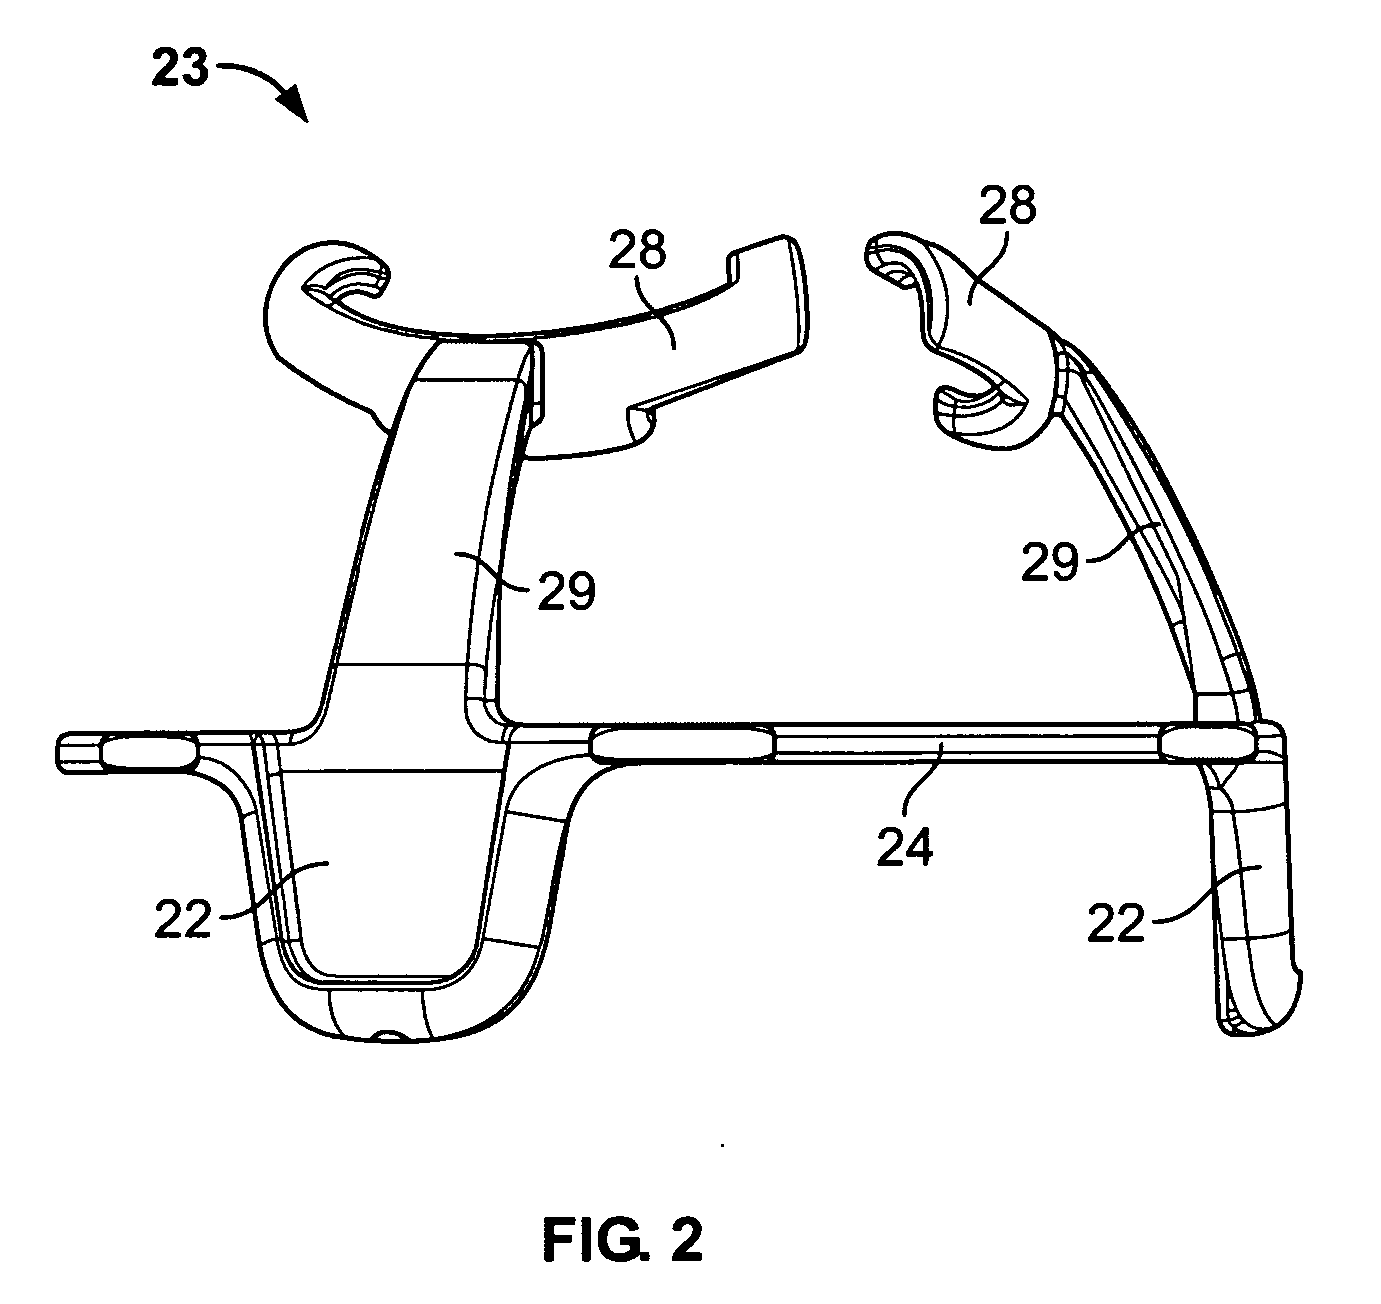 Heart valve support and lid liner system and methods